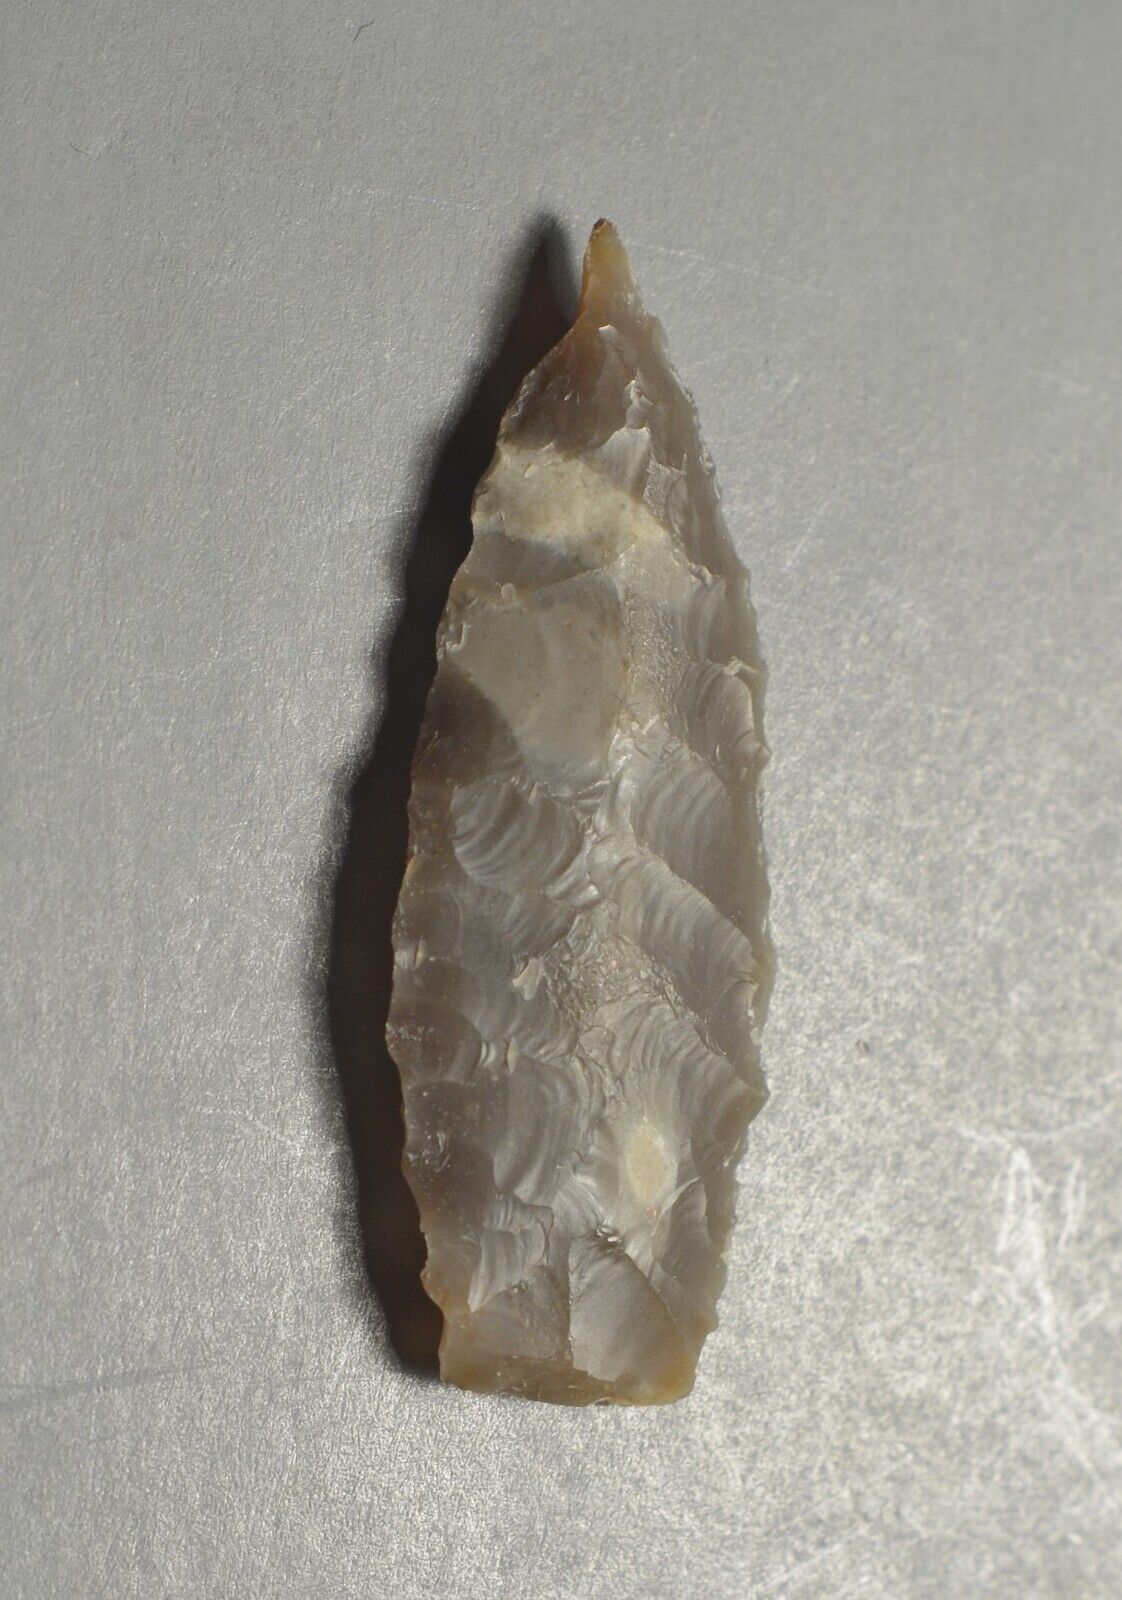 Authentic Reproduction of Pre 1600 Agate Arrowhead